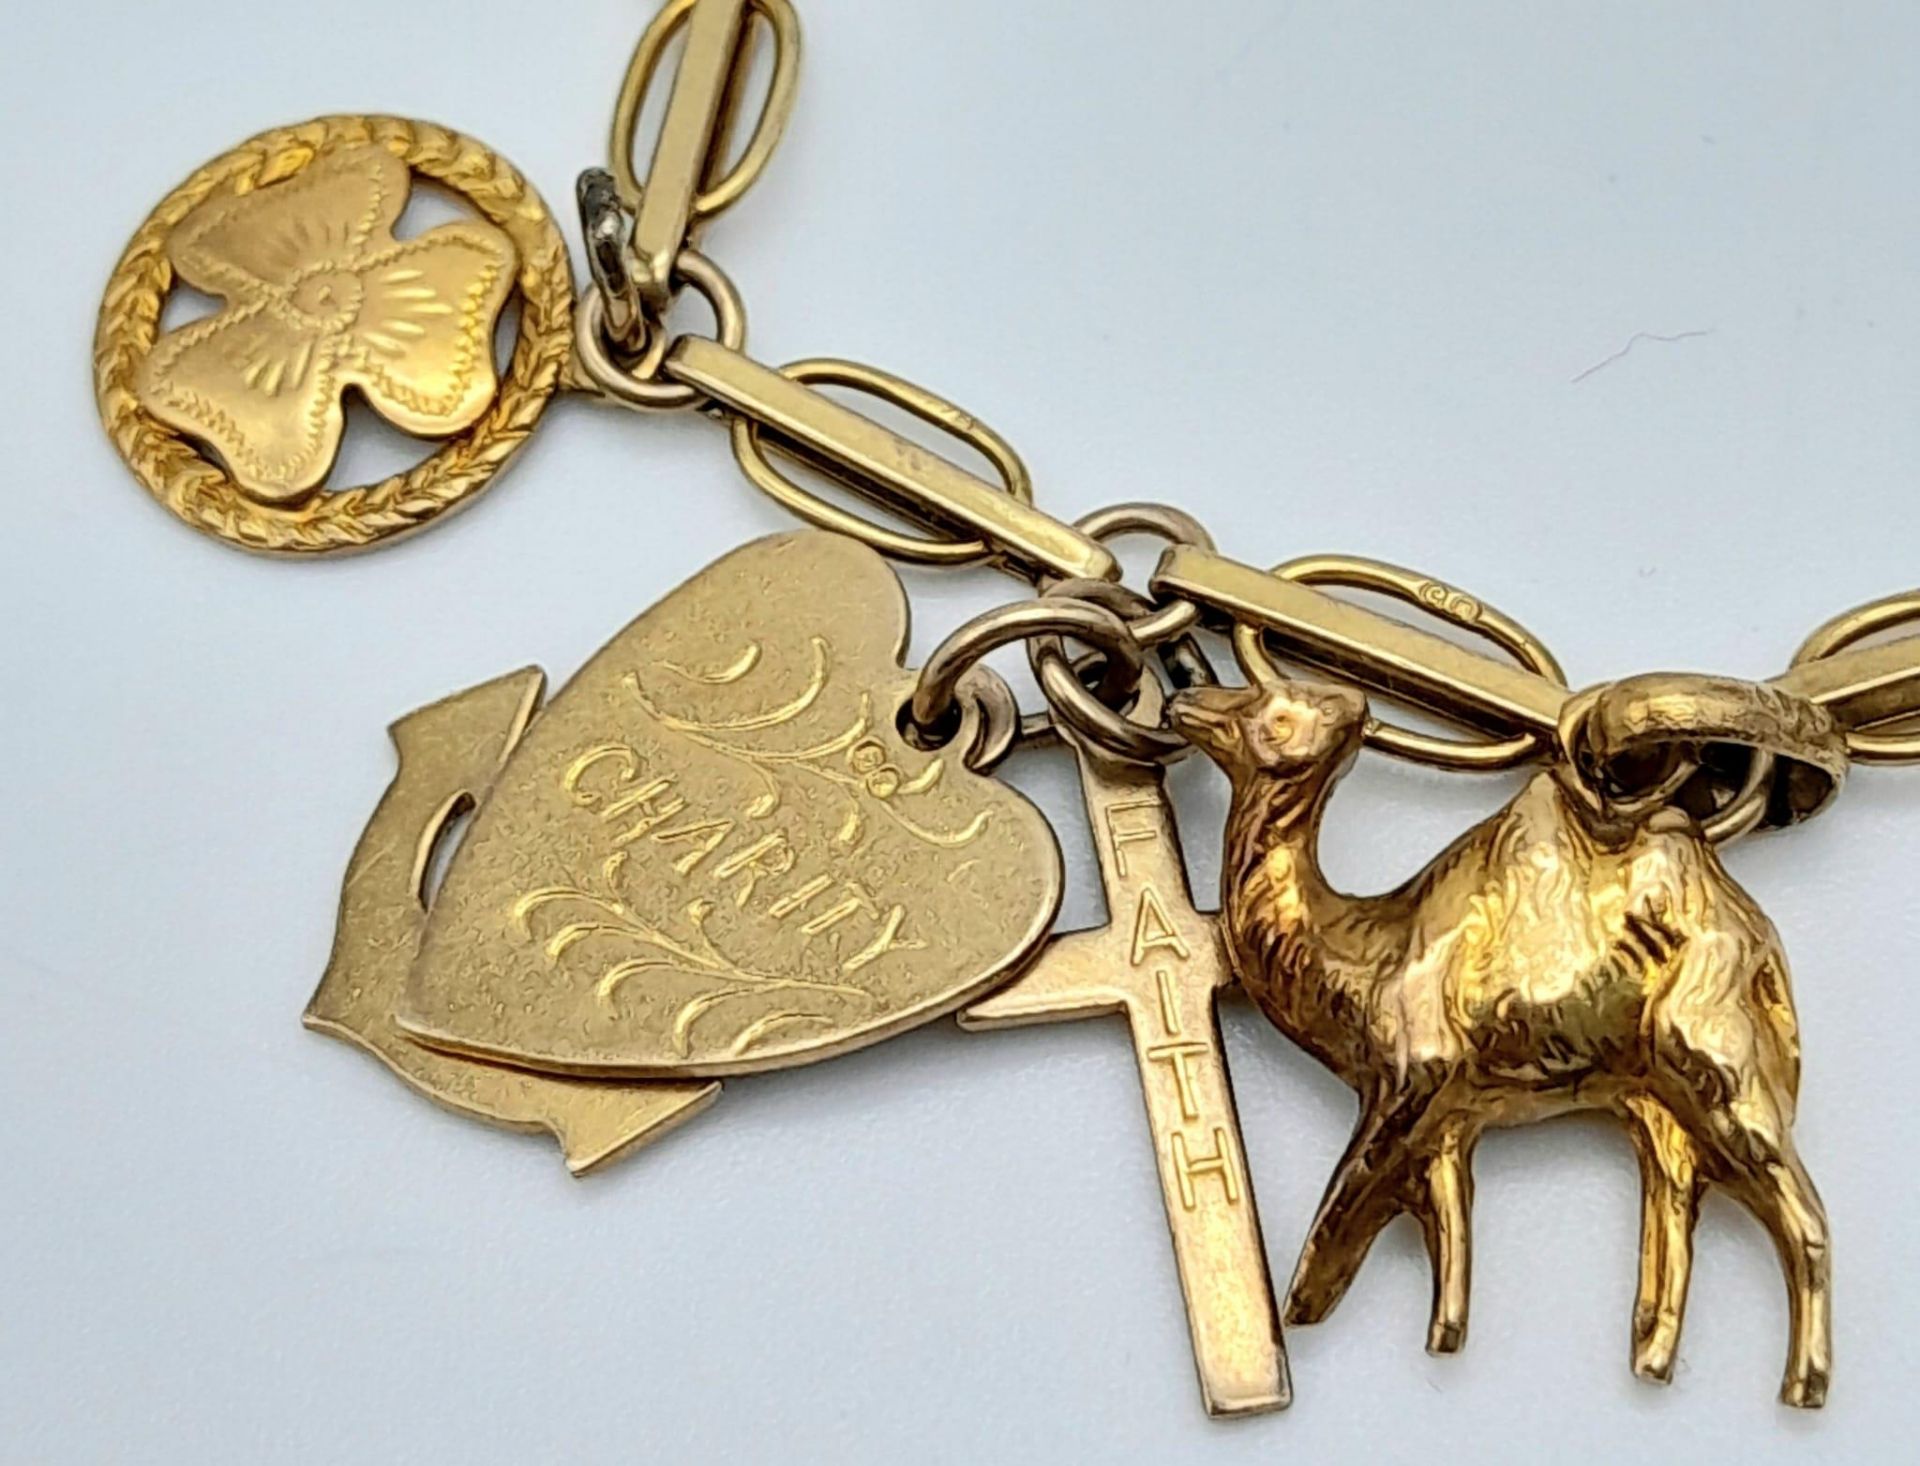 A 9K Yellow Gold Charm Bracelet. Eight charms including Elephant! 10.65g weight. - Image 2 of 6